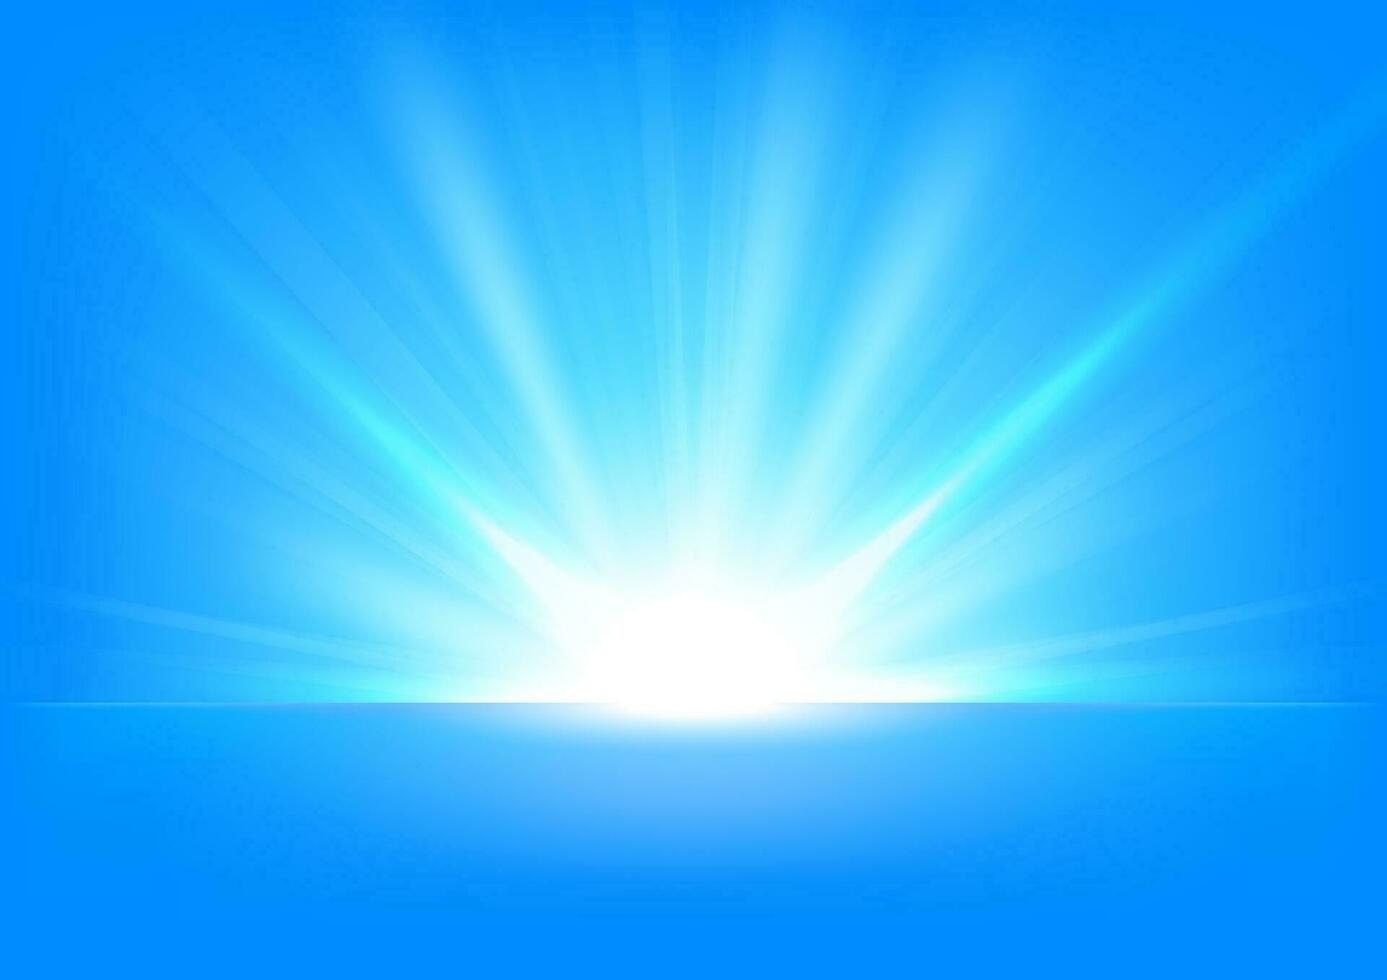 Blue Rays Rising On Bright Background, Vector Illustration